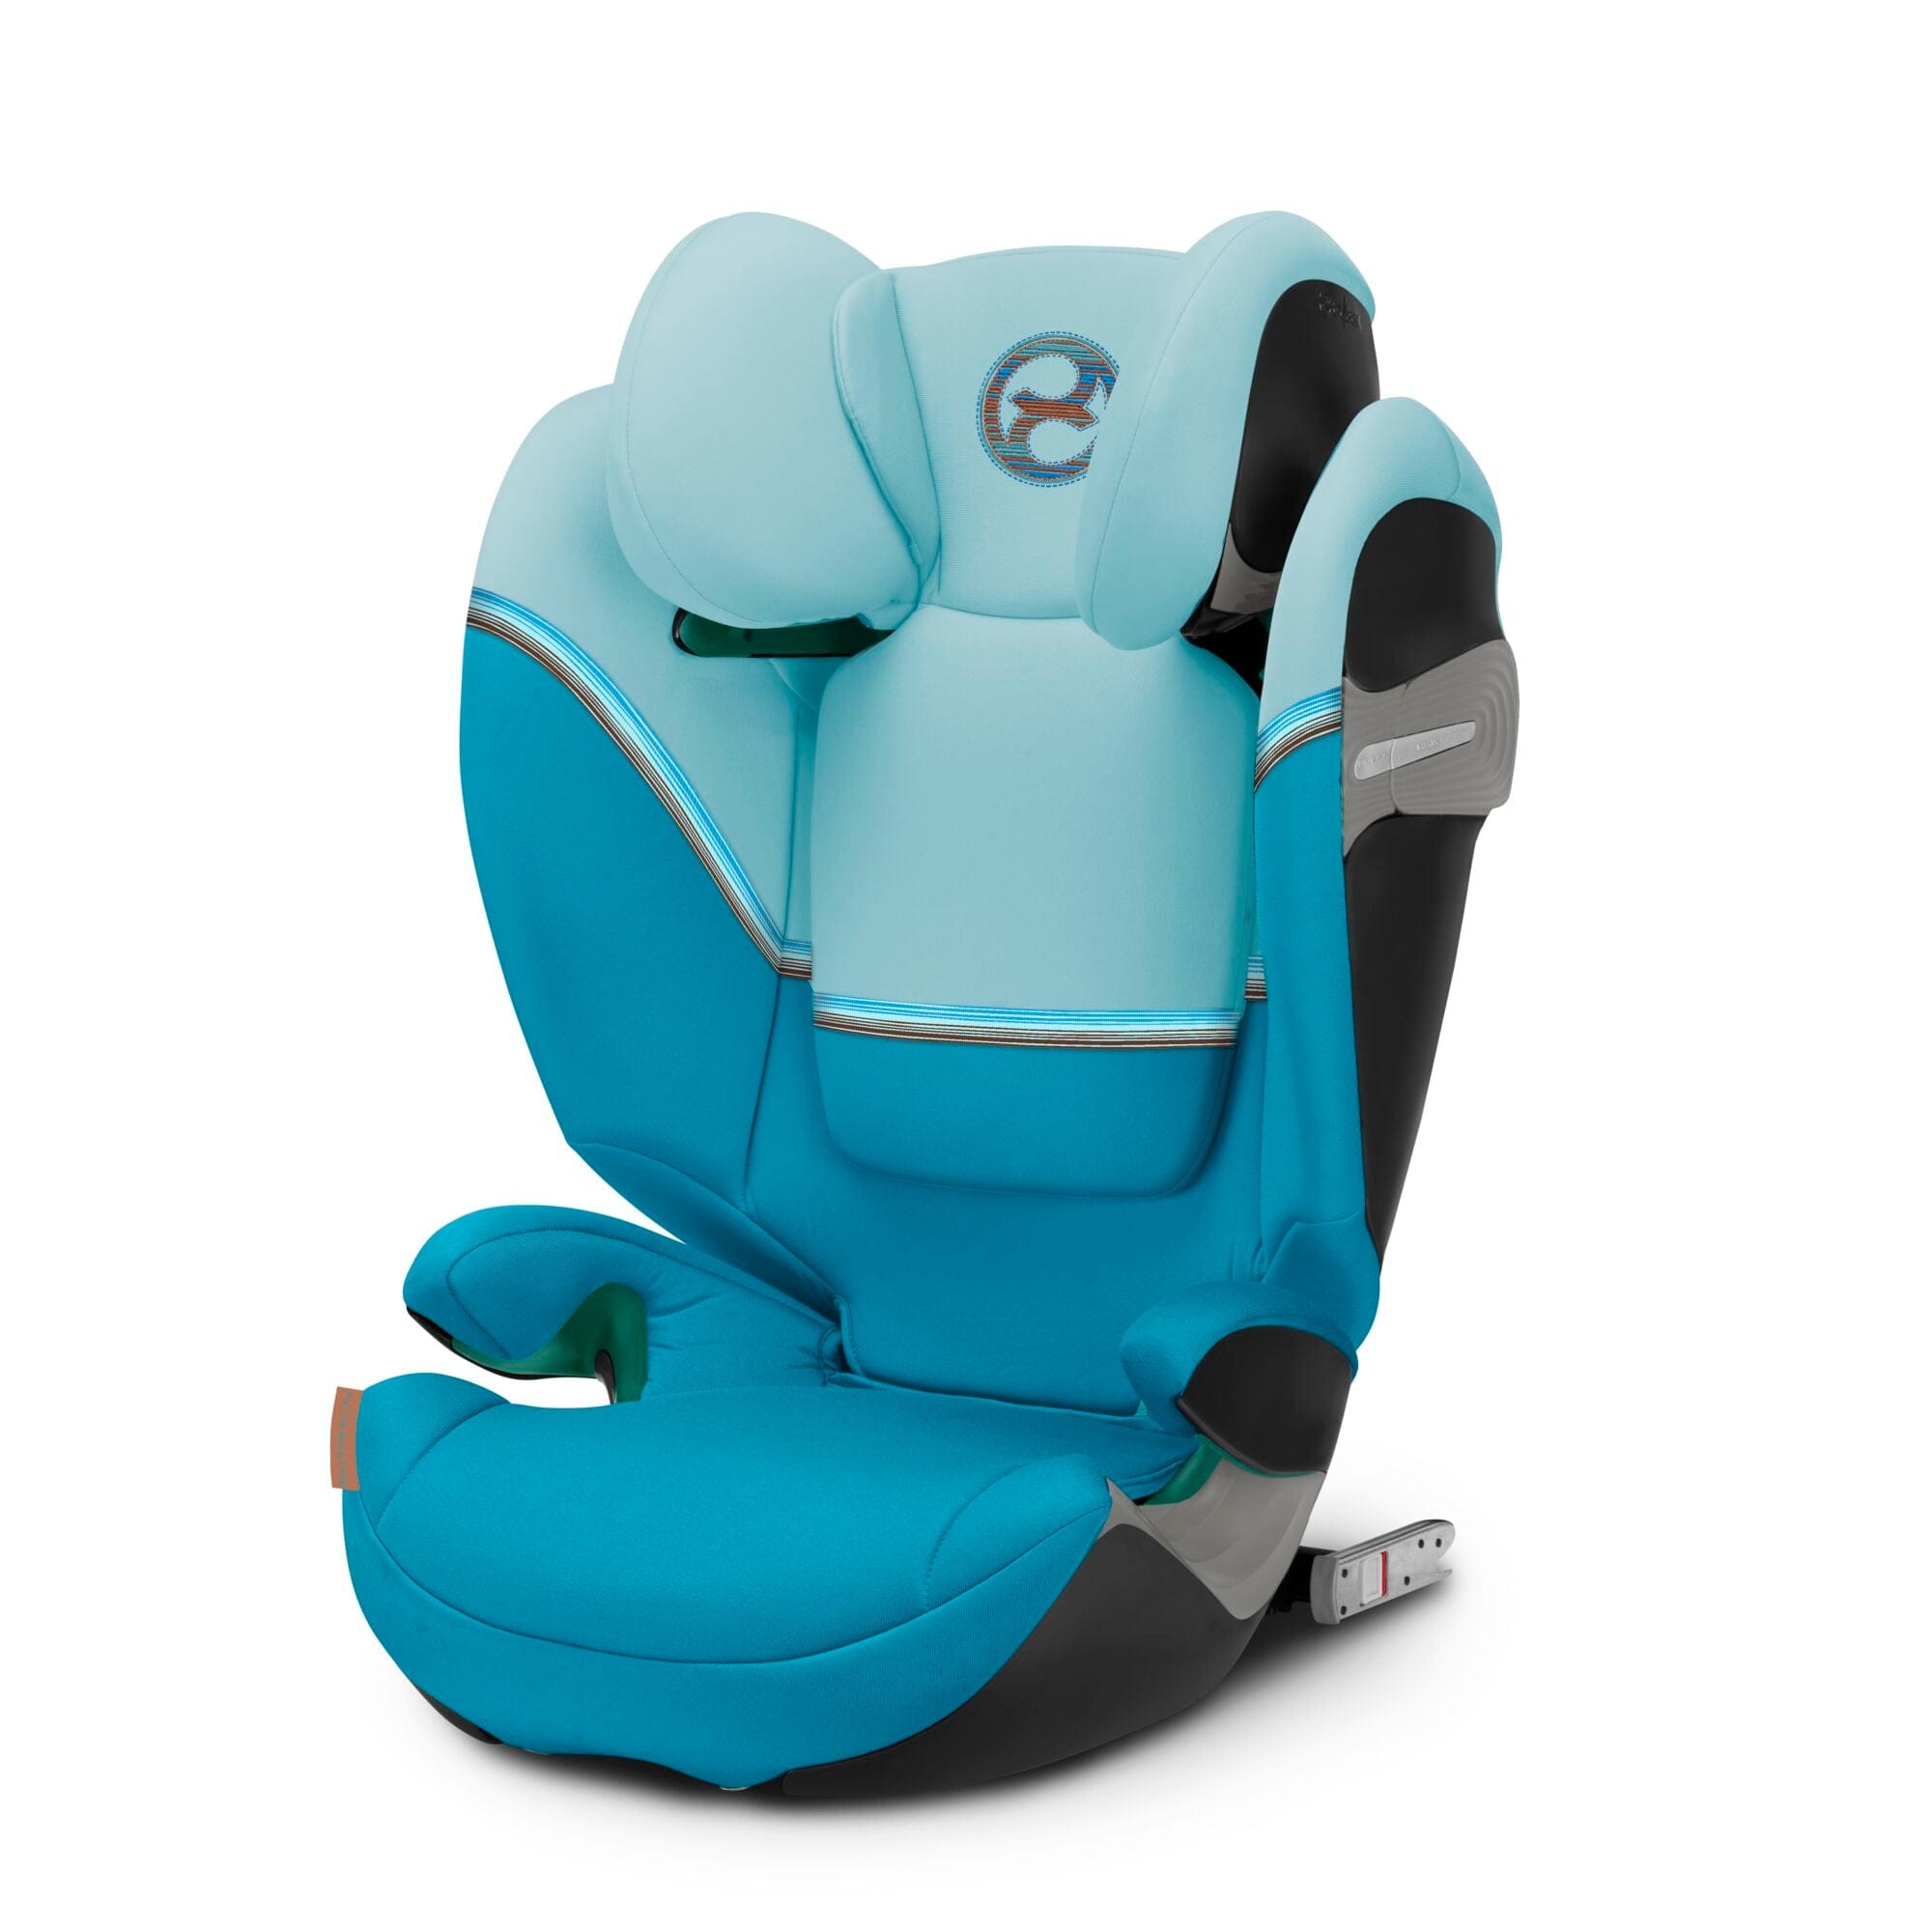 Cybex highback booster seats Cybex Solution S2 i-FIX Highback Booster Seat Beach Blue 522002268